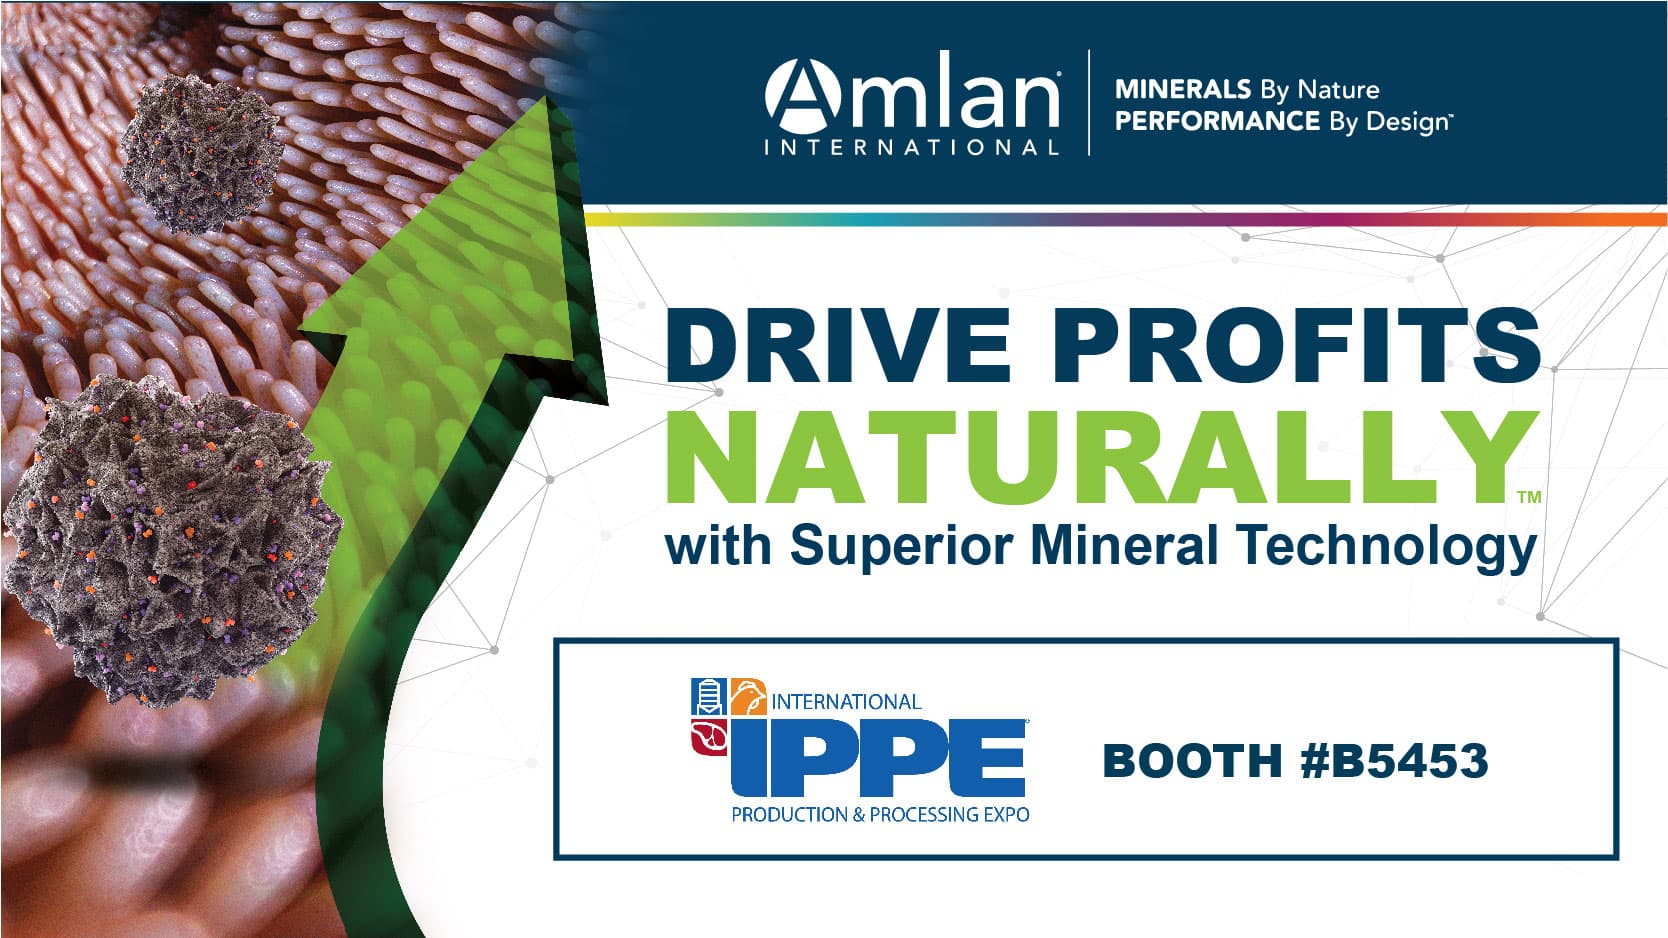 Drive profits naturally with superior mineral technology.